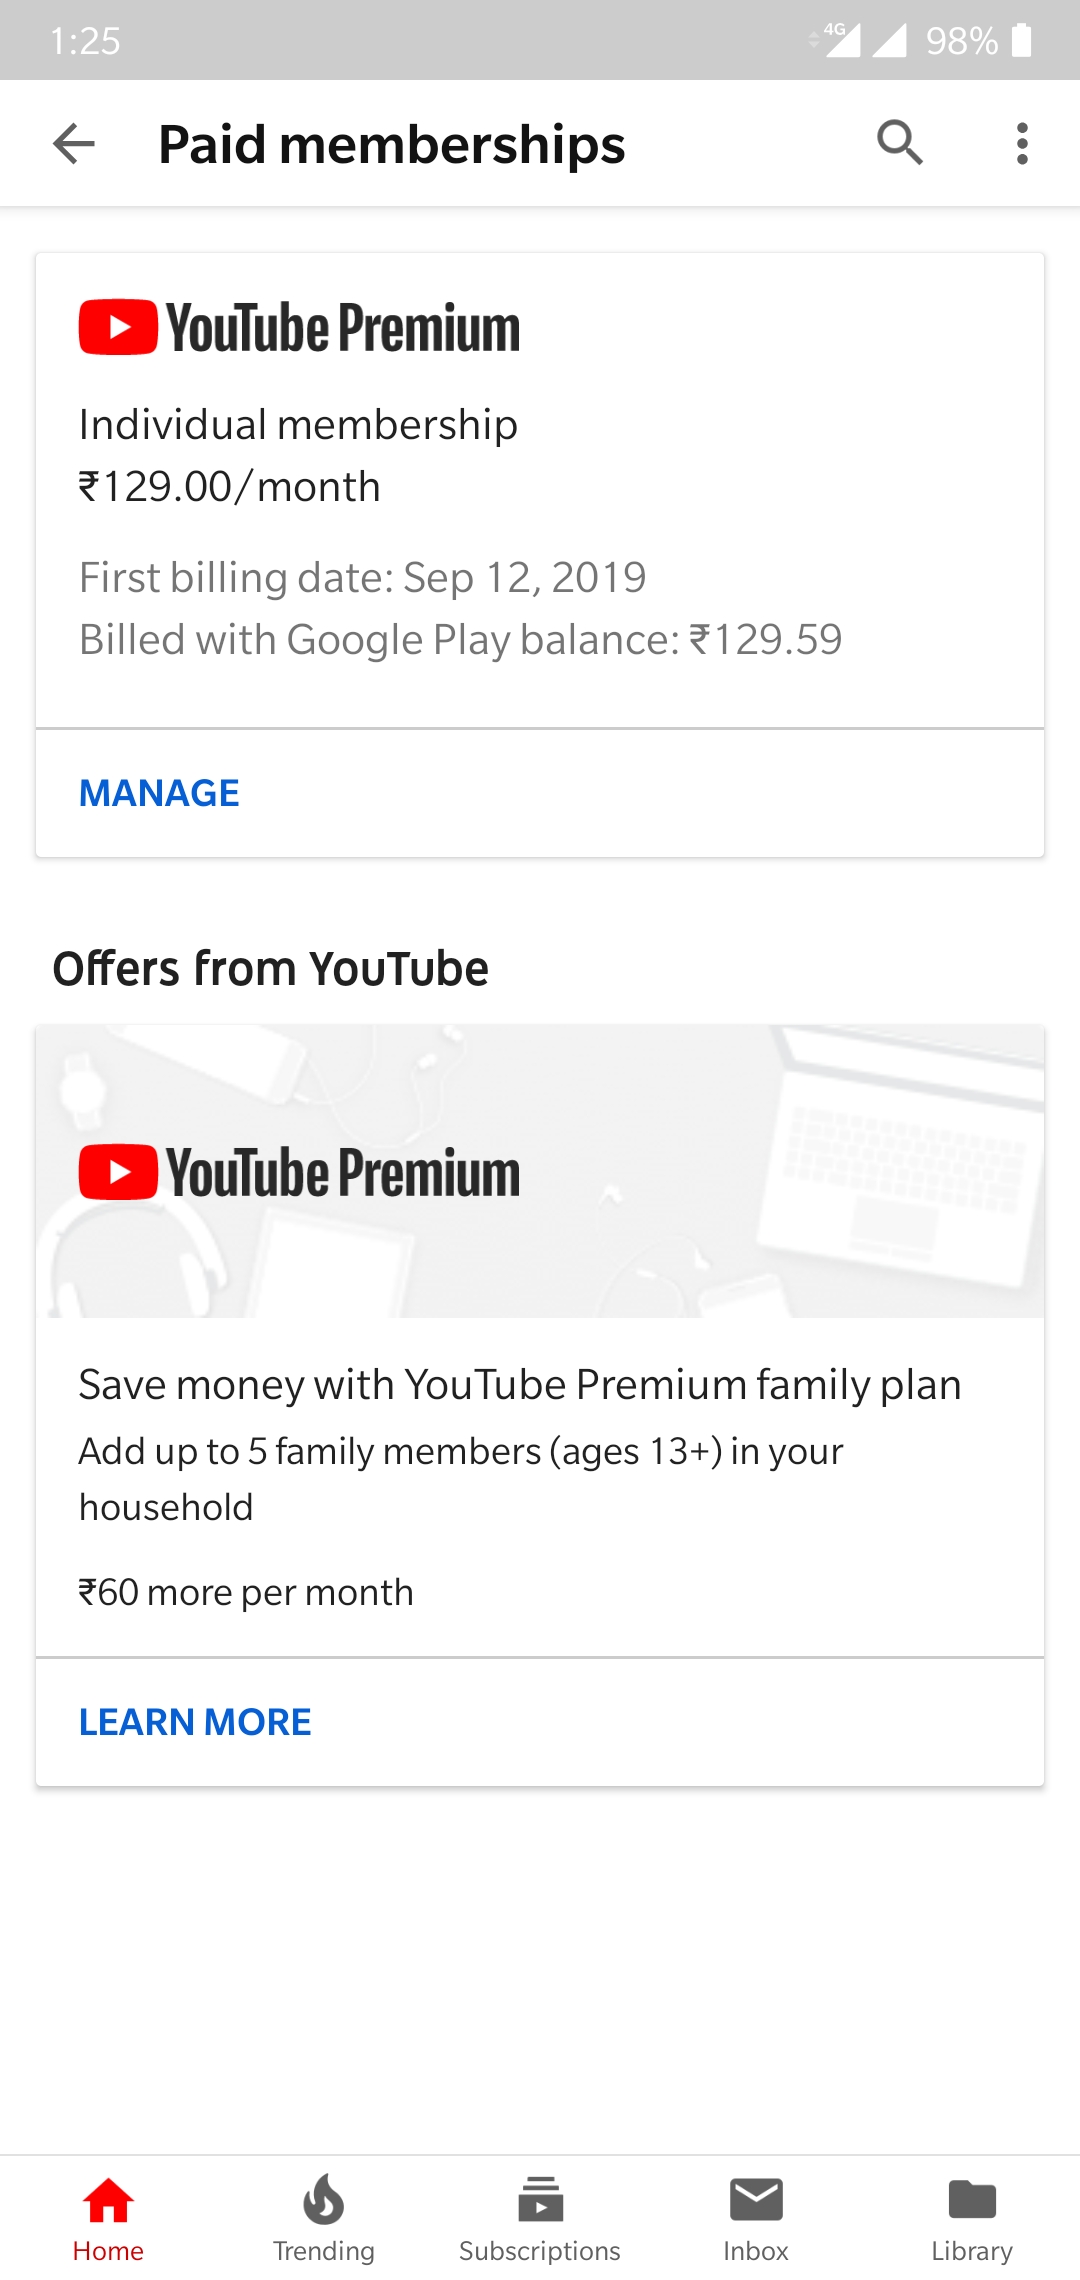 I Have 6 Months Flipkart Voucher For Youtube Premium But When I Redeemed Then It Is Showing 2 Months Youtube Community